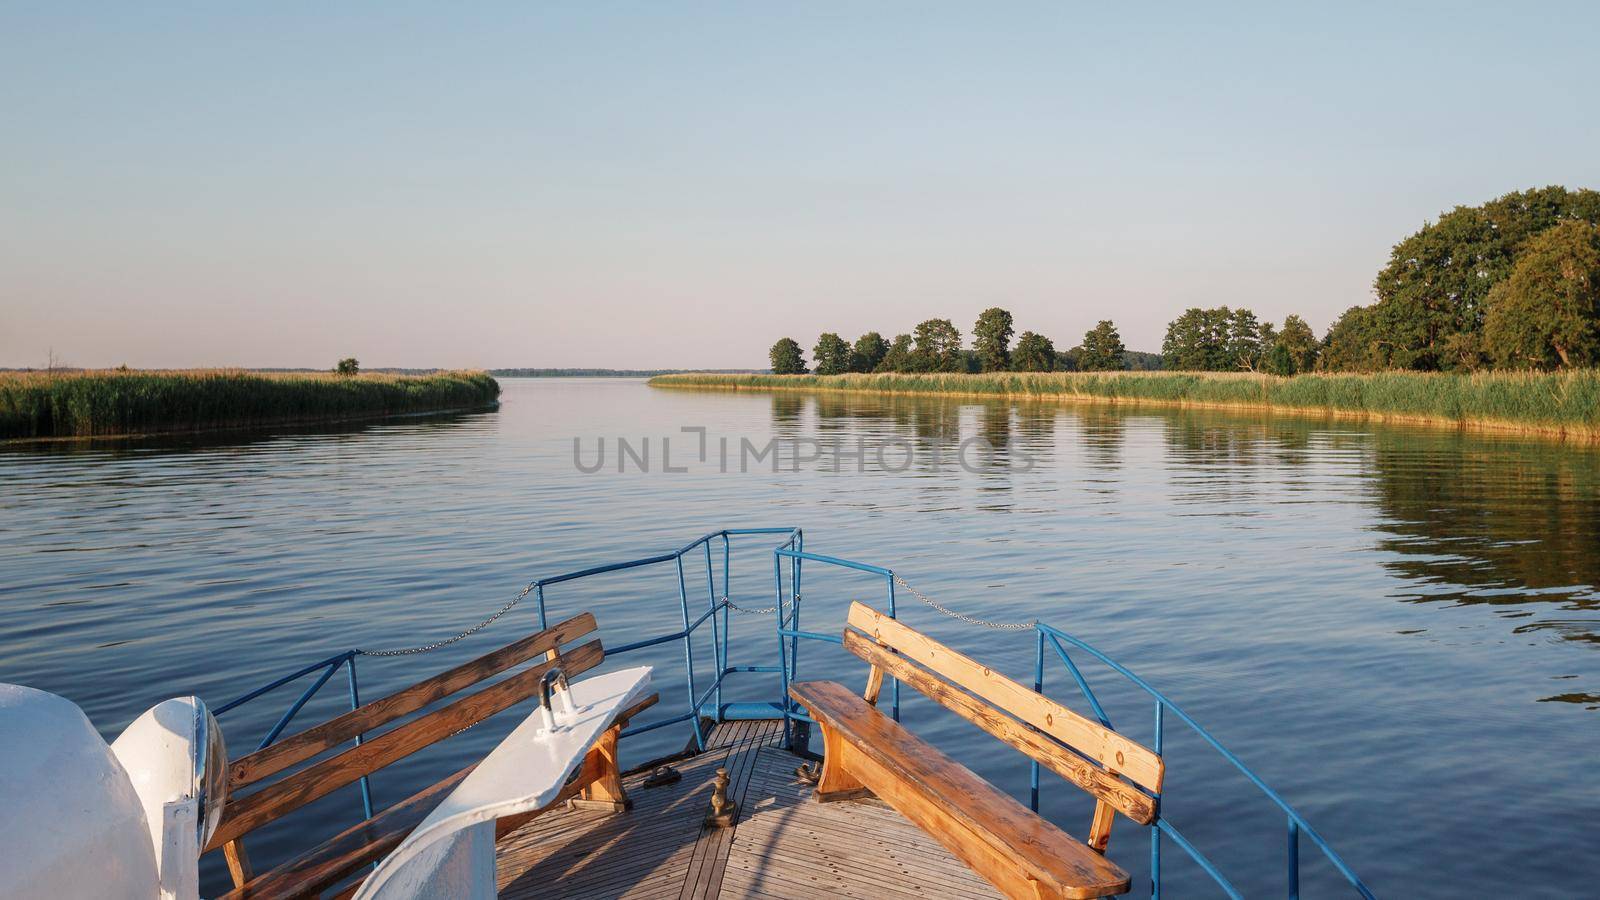 Landscape with boat front and river delta on a warm summer evening. by Lincikas